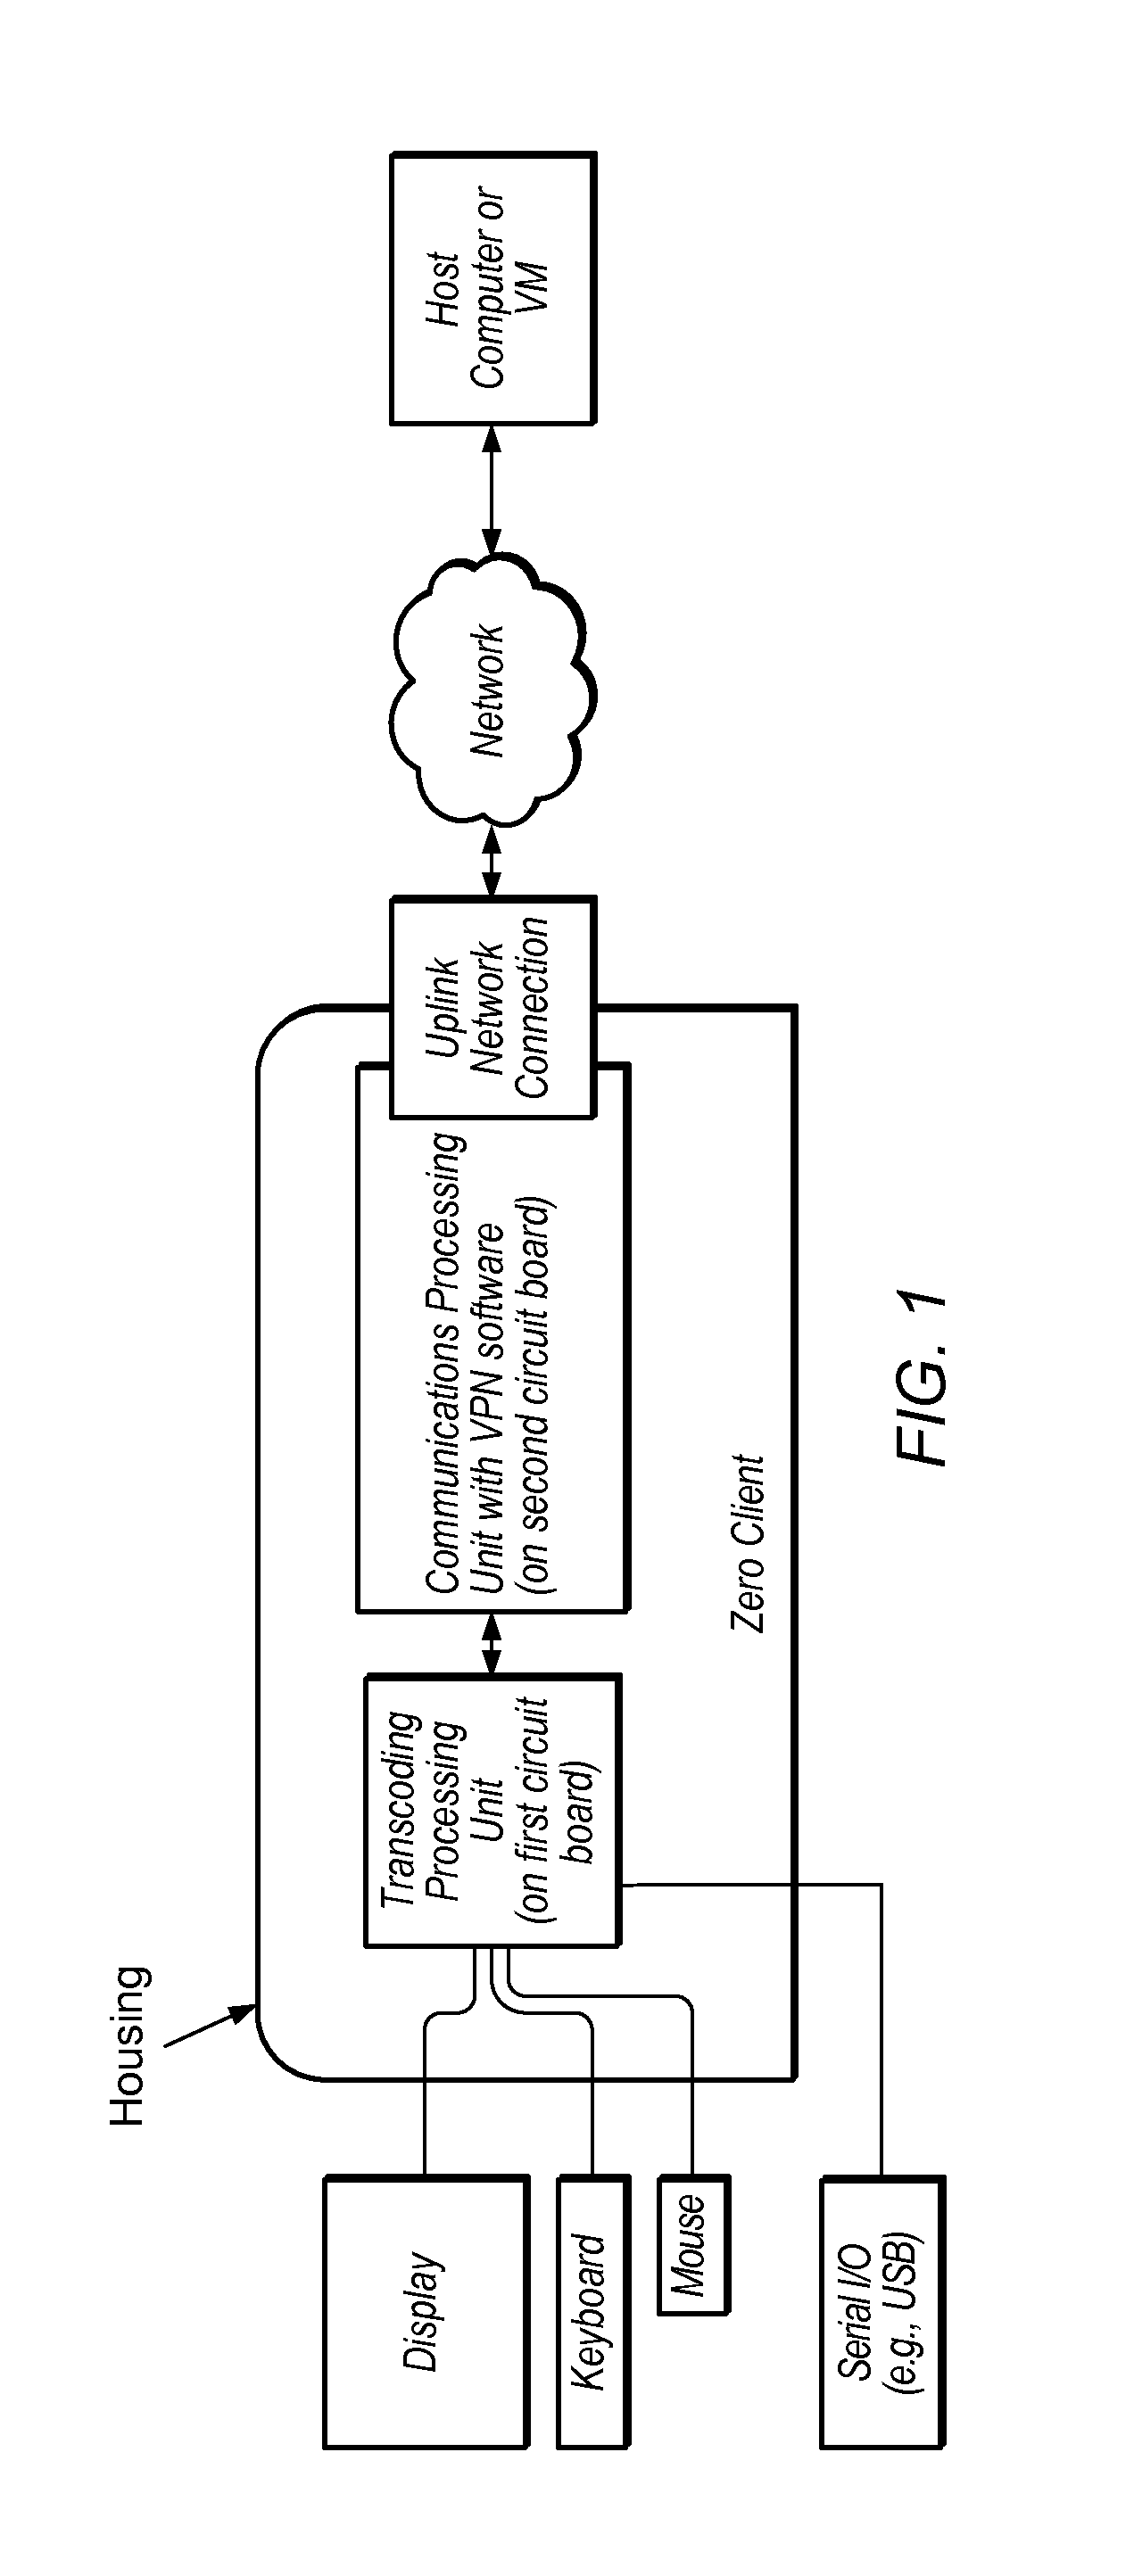 Zero Client Device With Integrated Virtual Private Network Capability